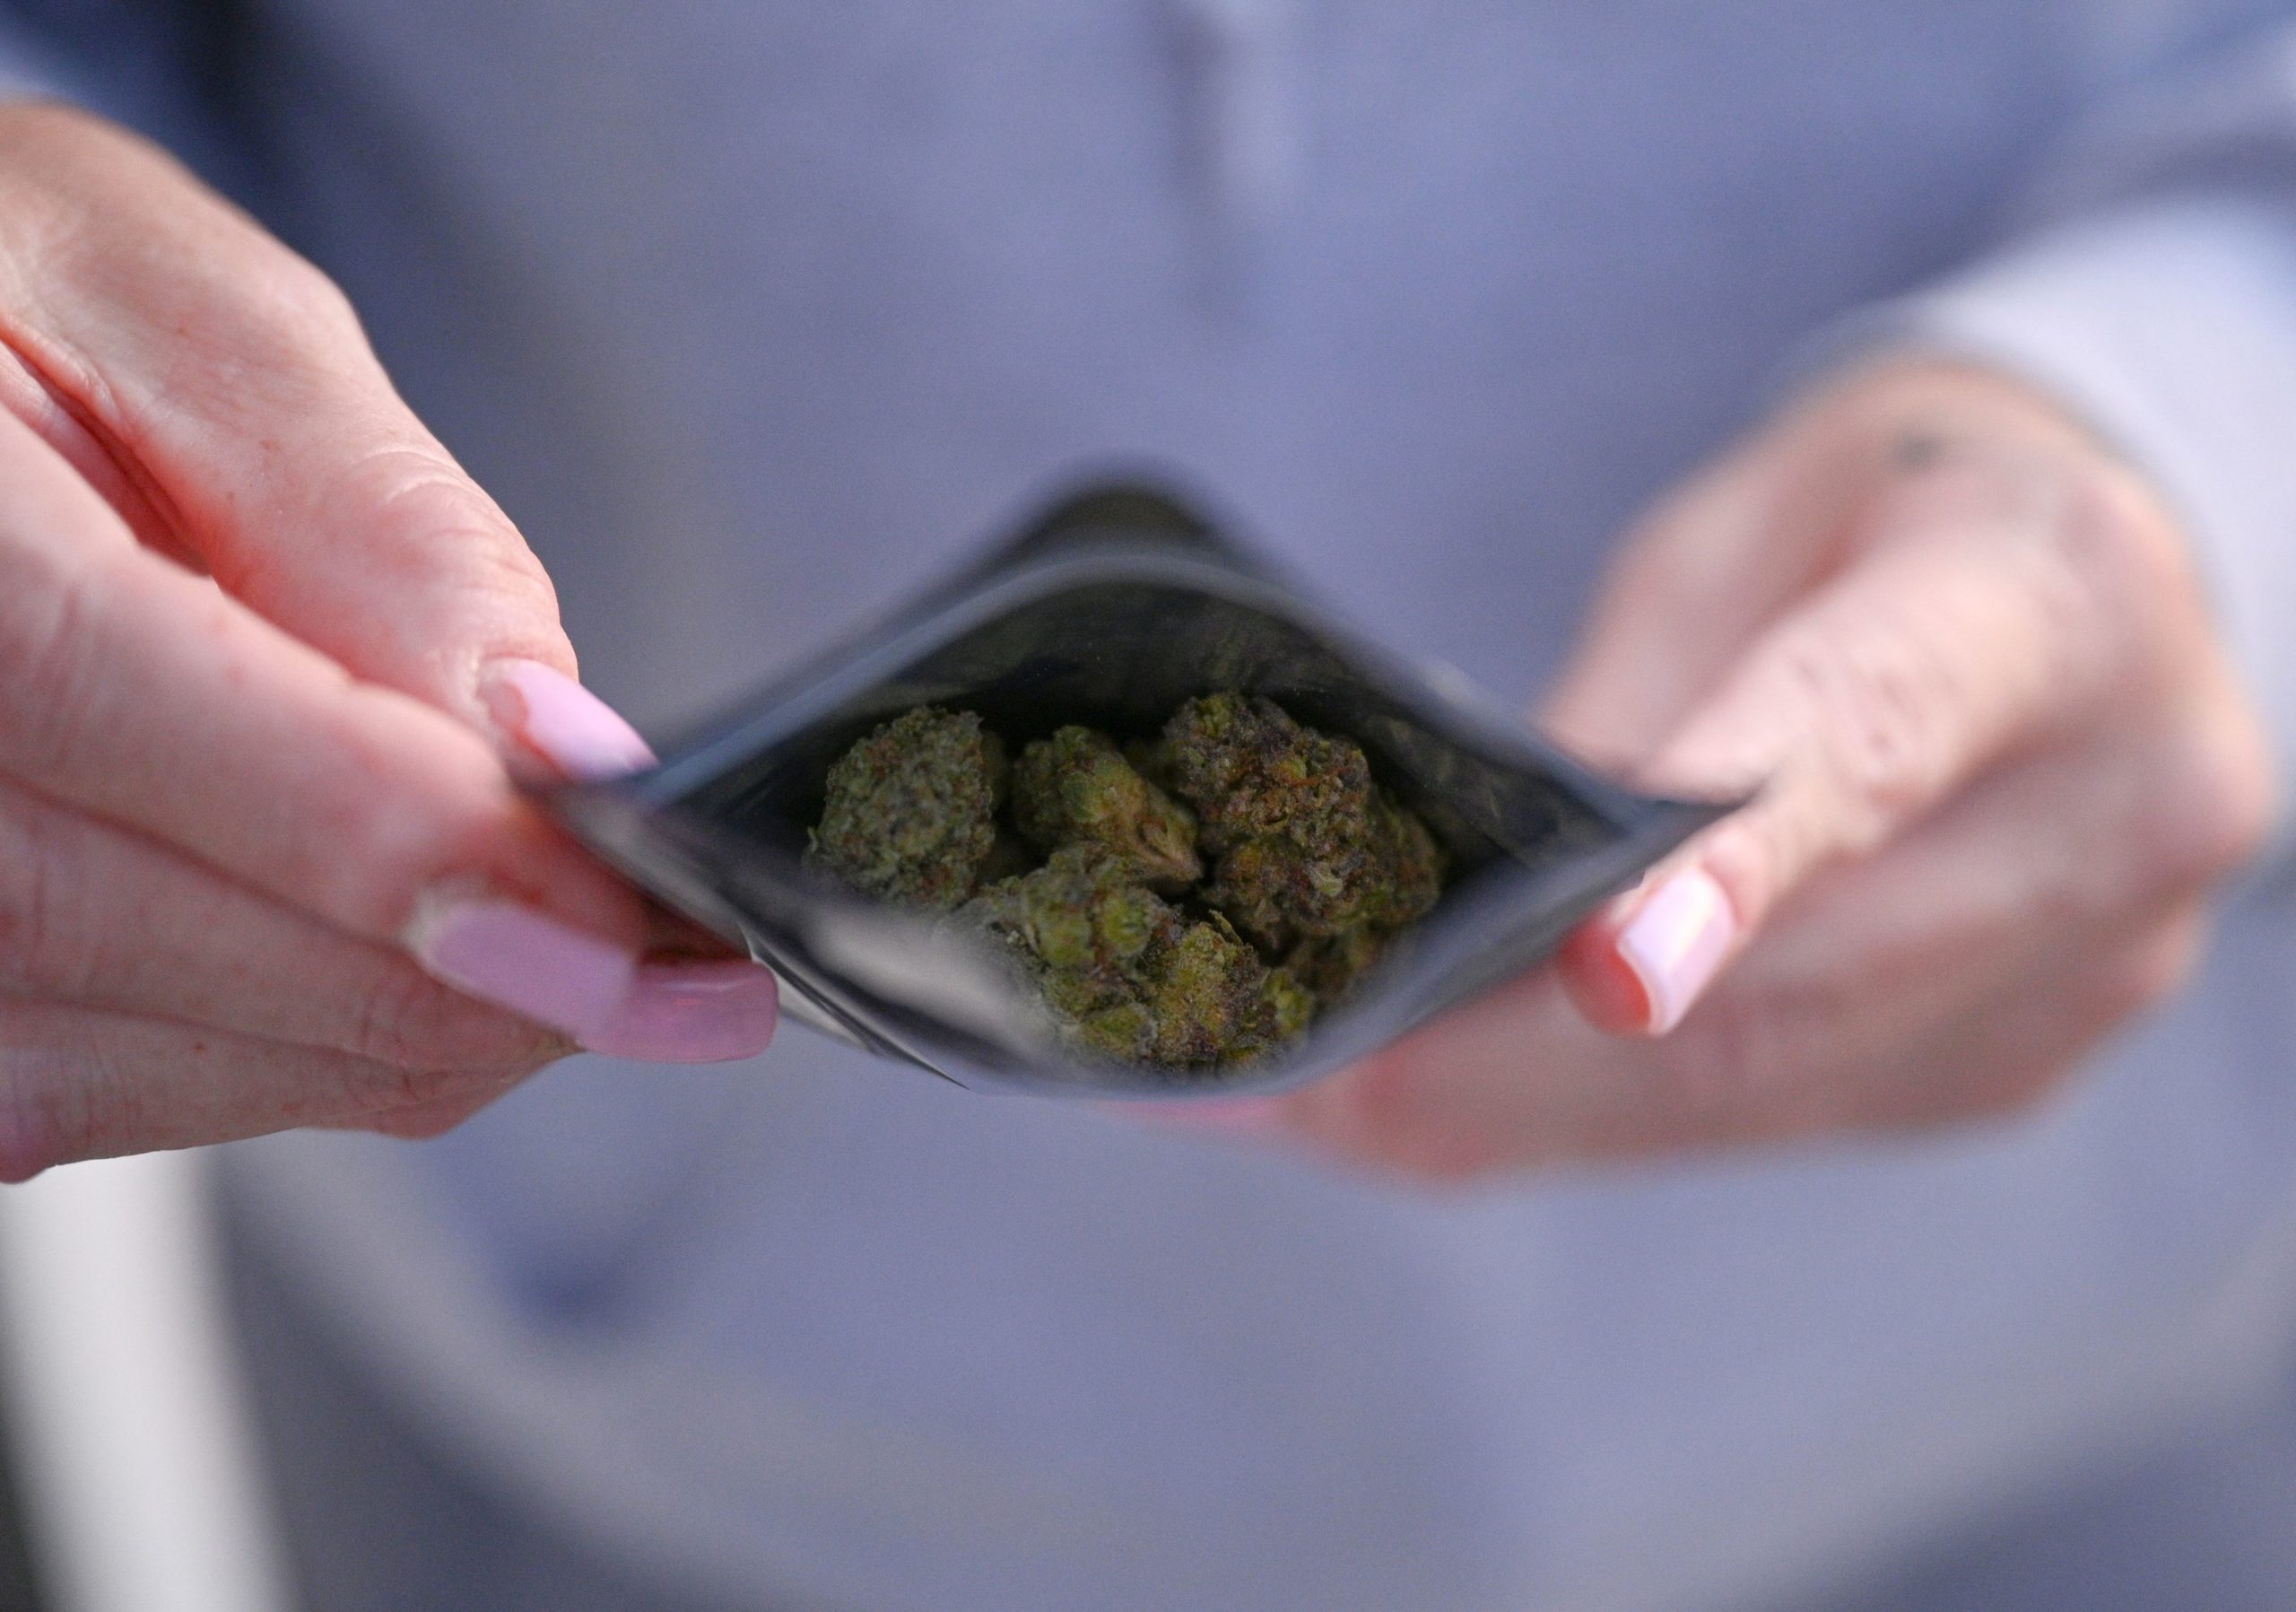 A customer displays a bag of "flower", or marijuana bud, that she purchased at an unlicensed cannabis dispensary in unincorporated Los Angeles County, just east of the Los Angeles city boundary, on December 21, 2022. - Photo by ROBYN BECK/AFP via Getty Images